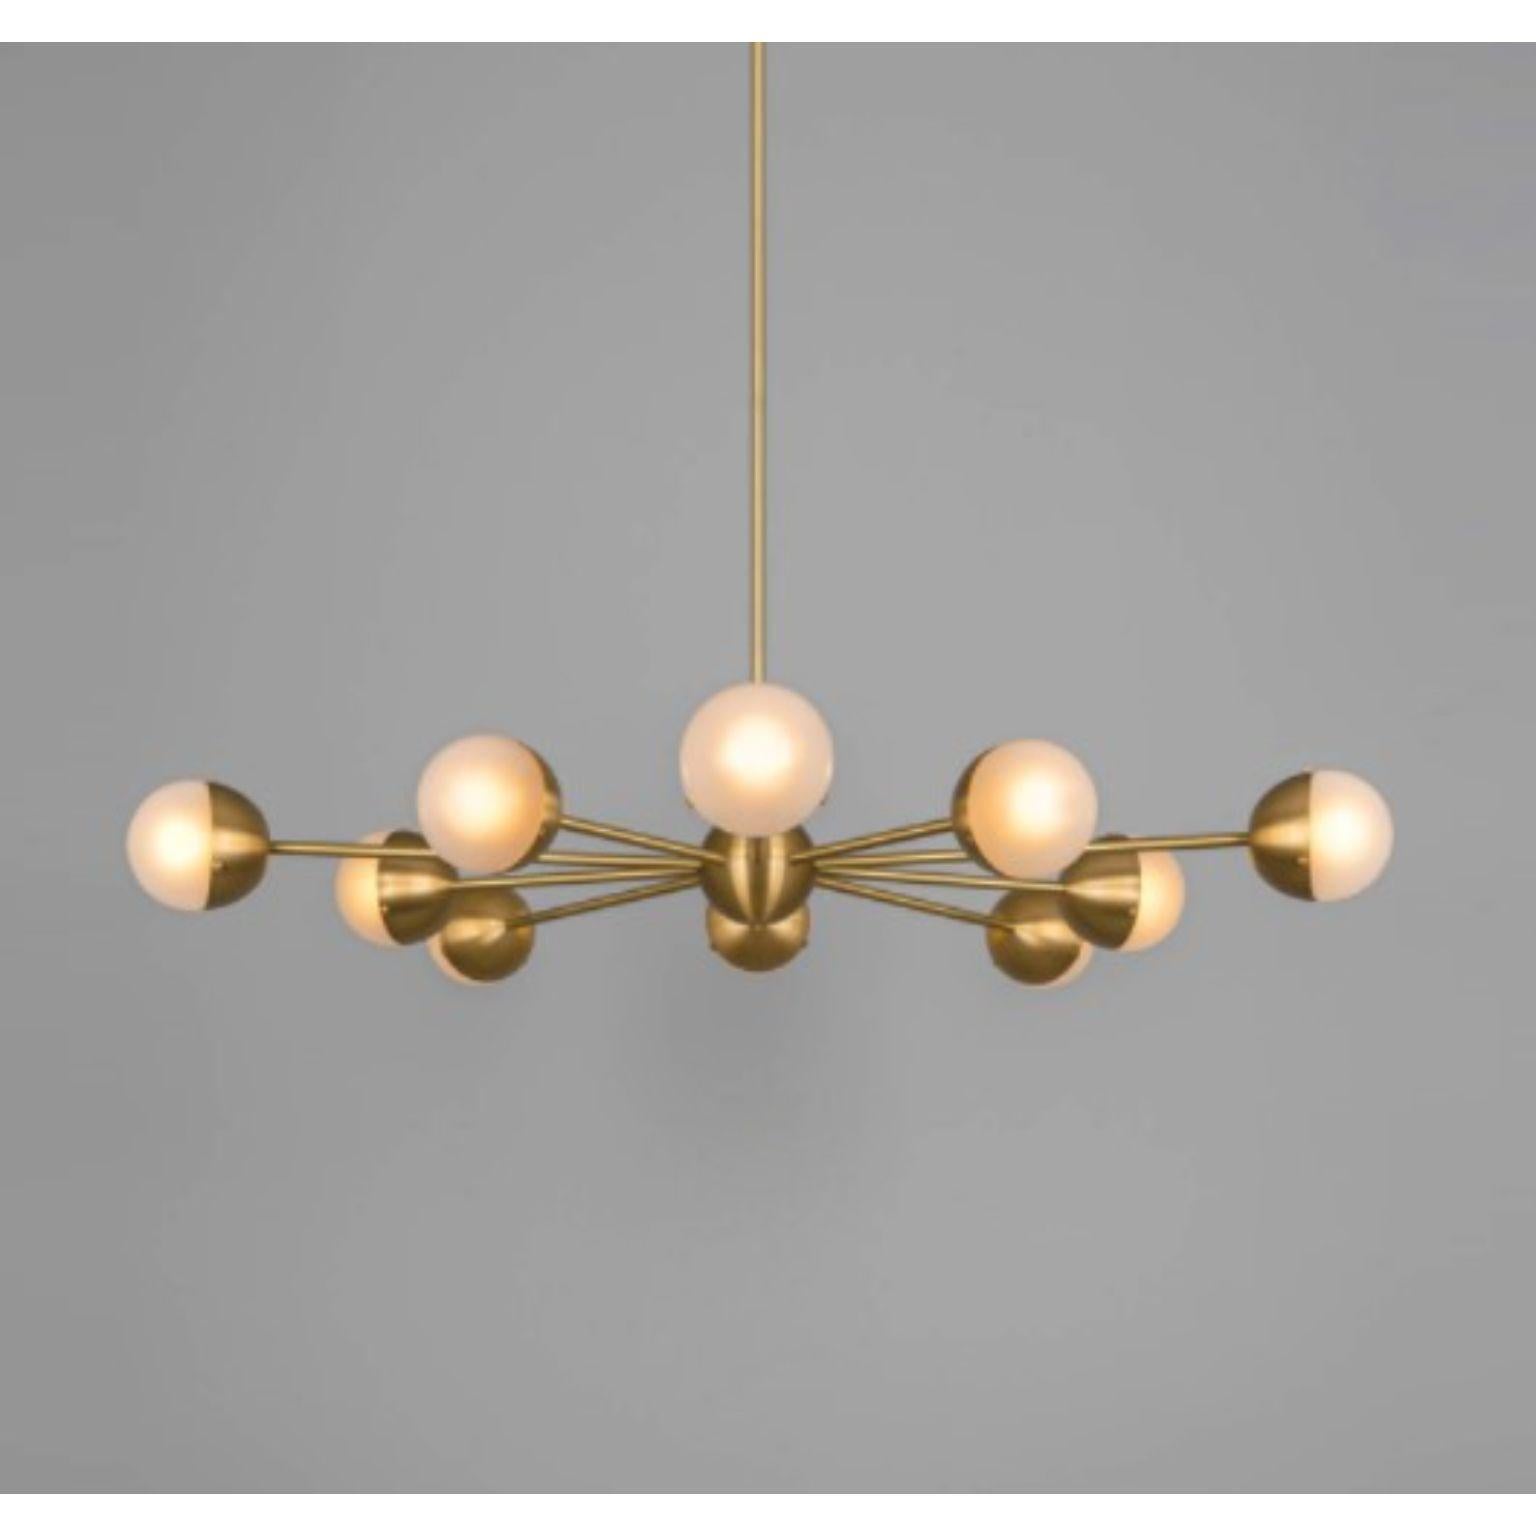 Molecule Spark round 10 chandelier by Schwung
Dimensions: D 120.9 x H 118.4 cm
Materials: Brass, opal glass
Weight: 10.5 kg

Finishes available: Black gunmetal, polished nickel, brass
Other sizes available.

 Schwung is a german word, and